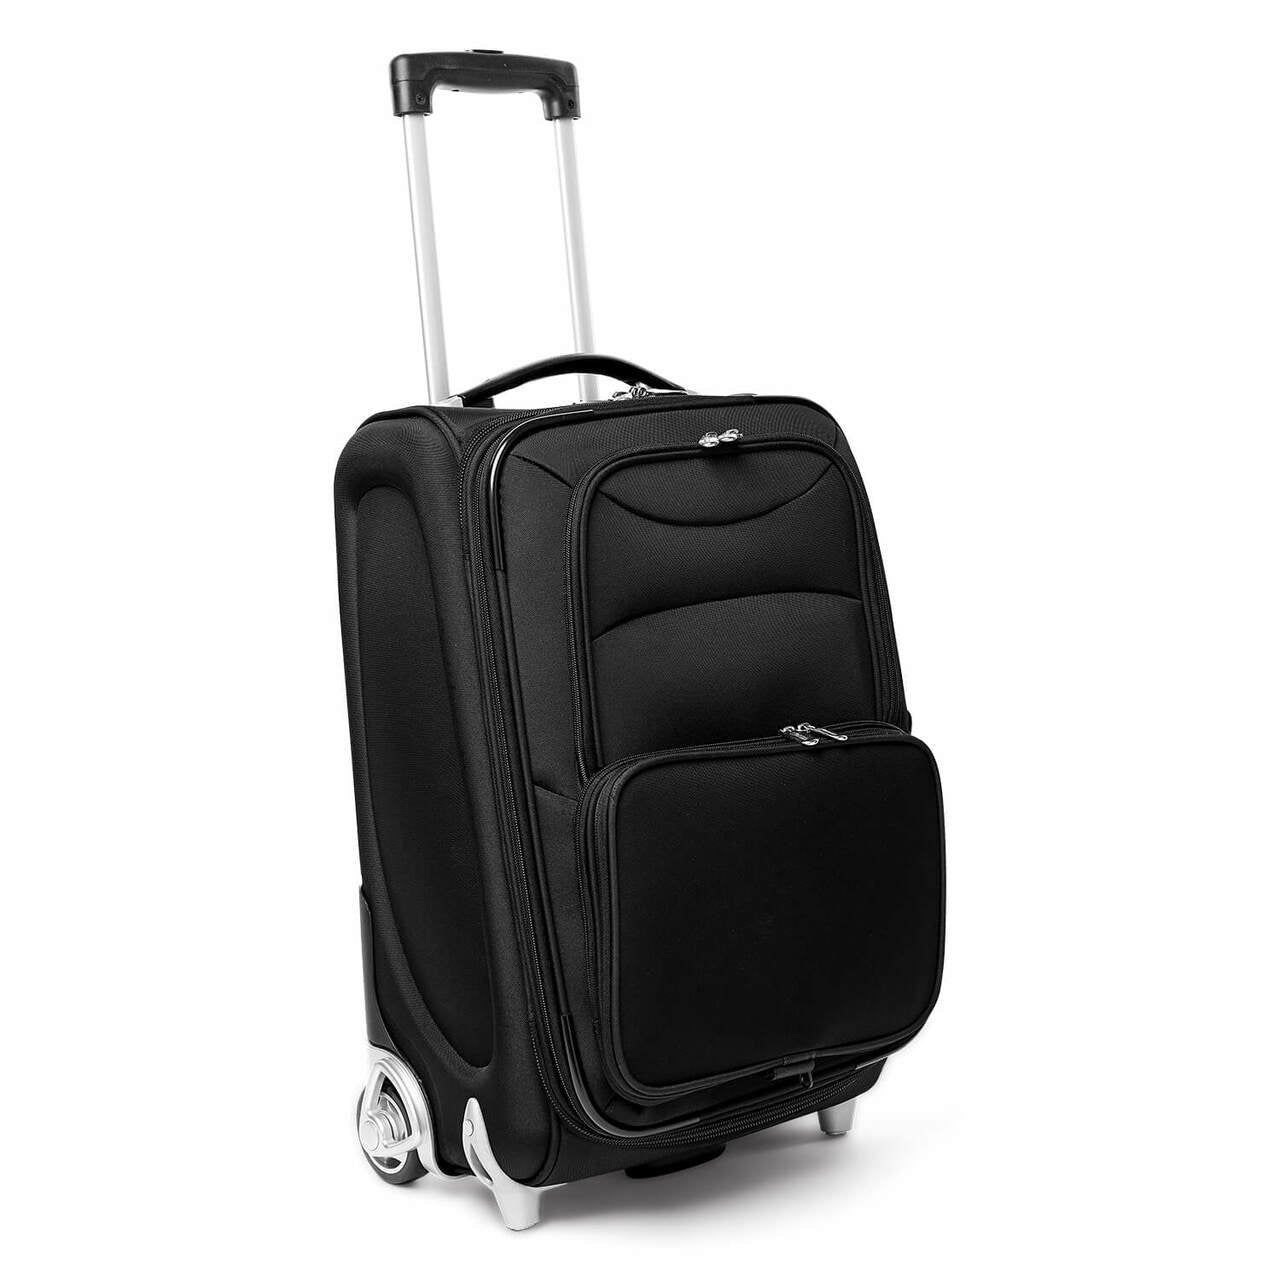 Wild Carry On Luggage | Minnesota Wild Rolling Carry On Luggage